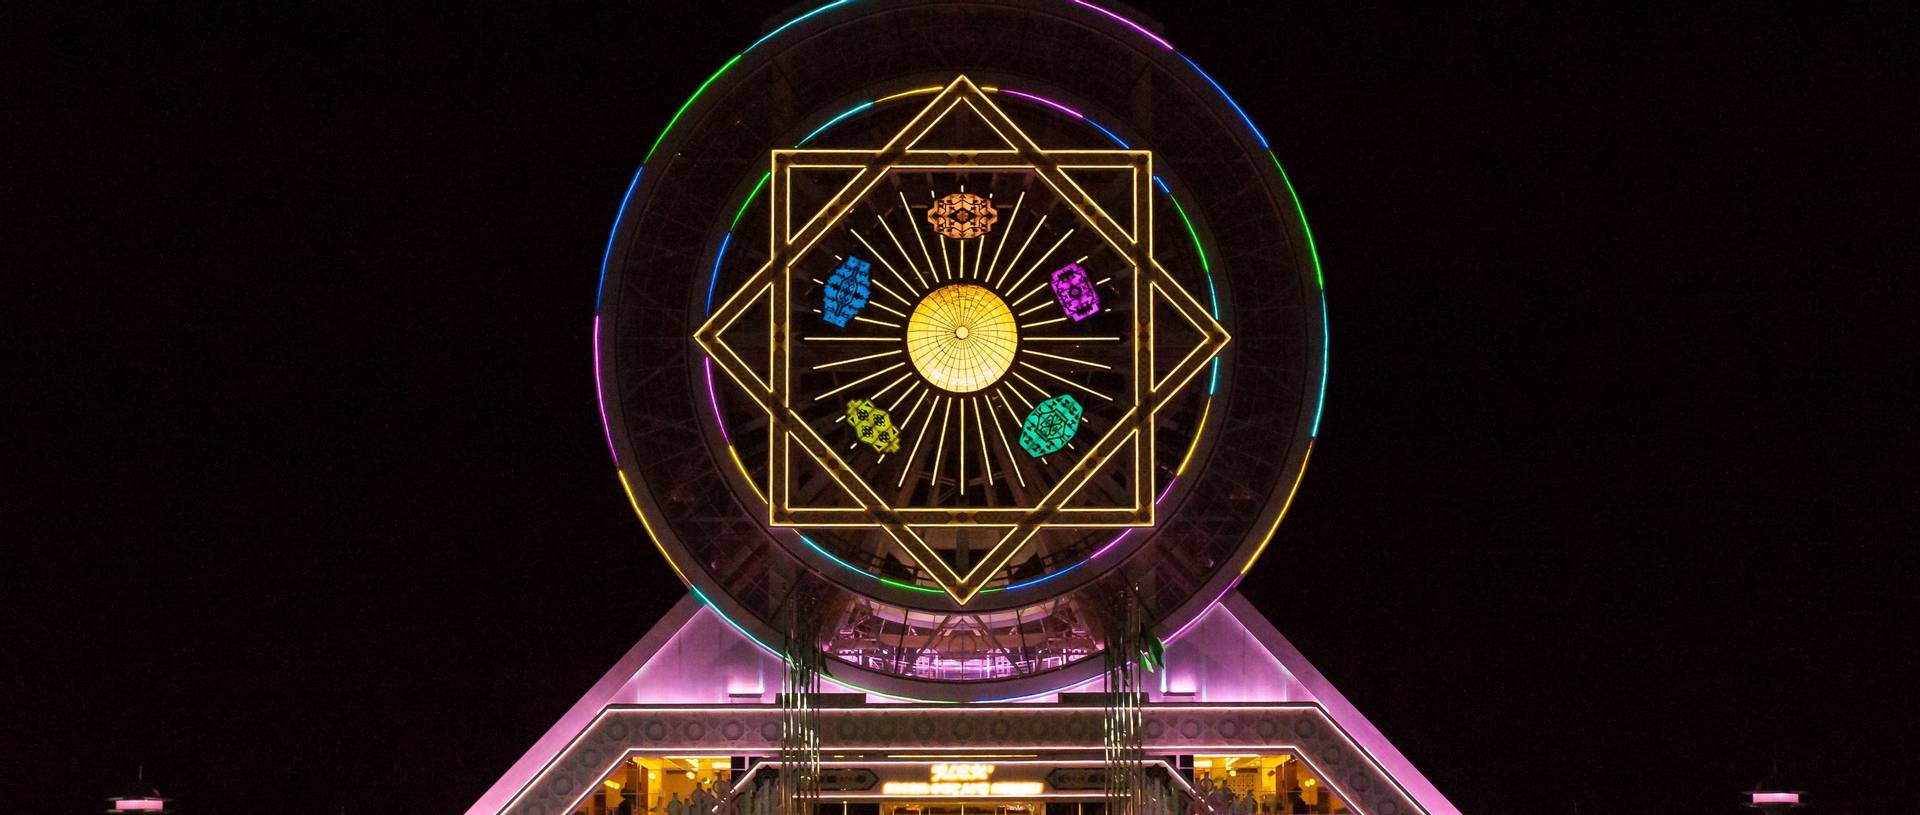 Ashgabat'S Alem Cultural And Entertainment Center, Largest Enclosed Ferris Wheel By Night